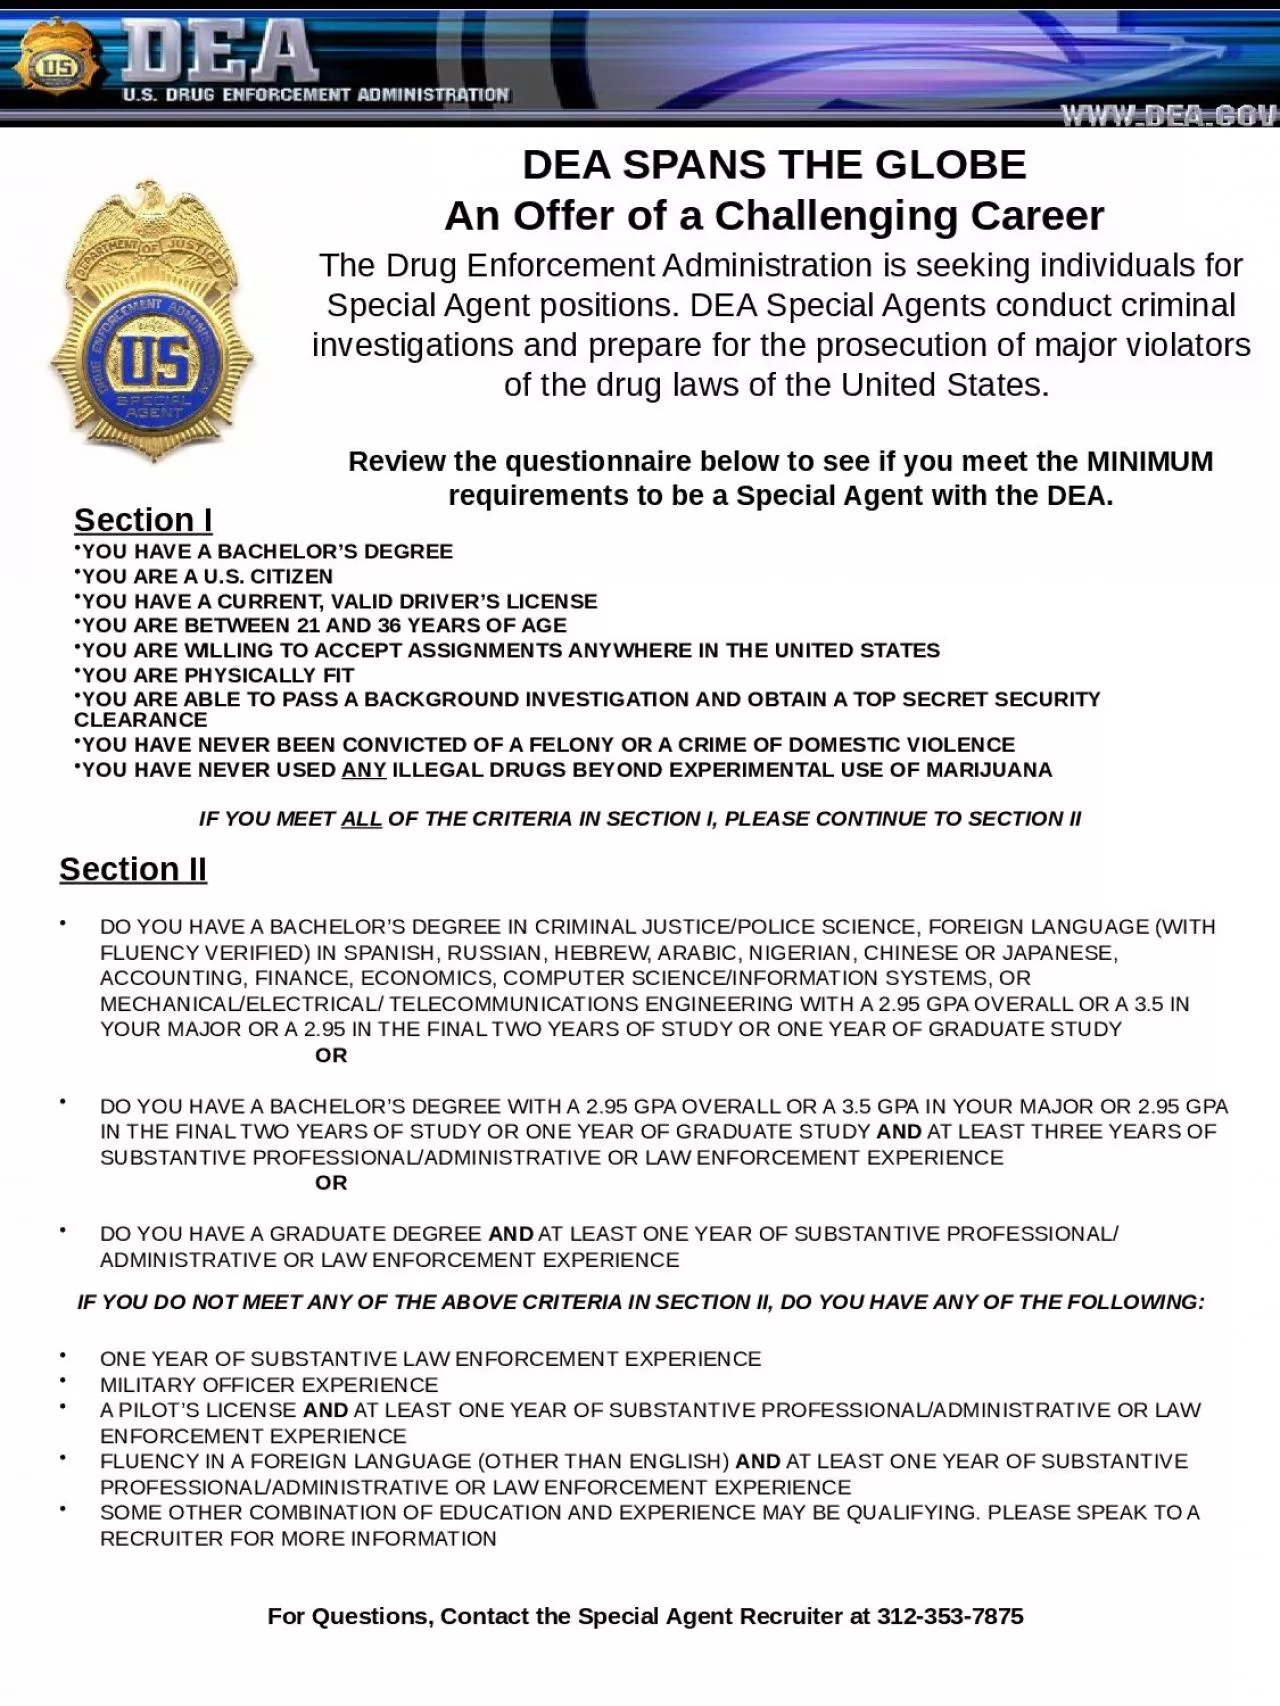 The Drug Enforcement Administration is seeking individuals for Special Agent positions.